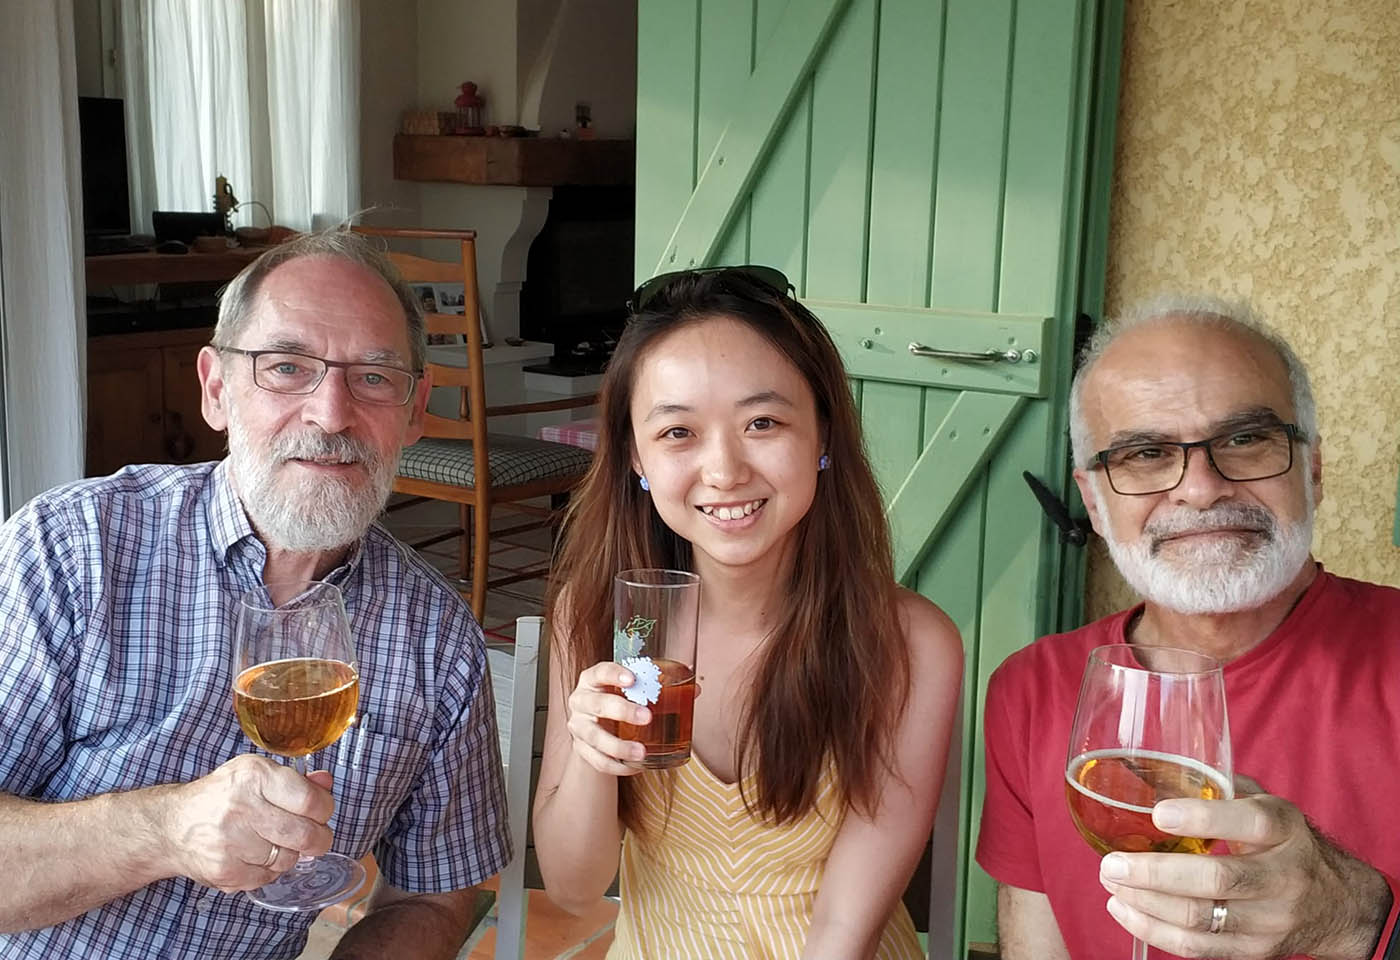 Three quantum scientists sitting with happy smiles and drinks in hand